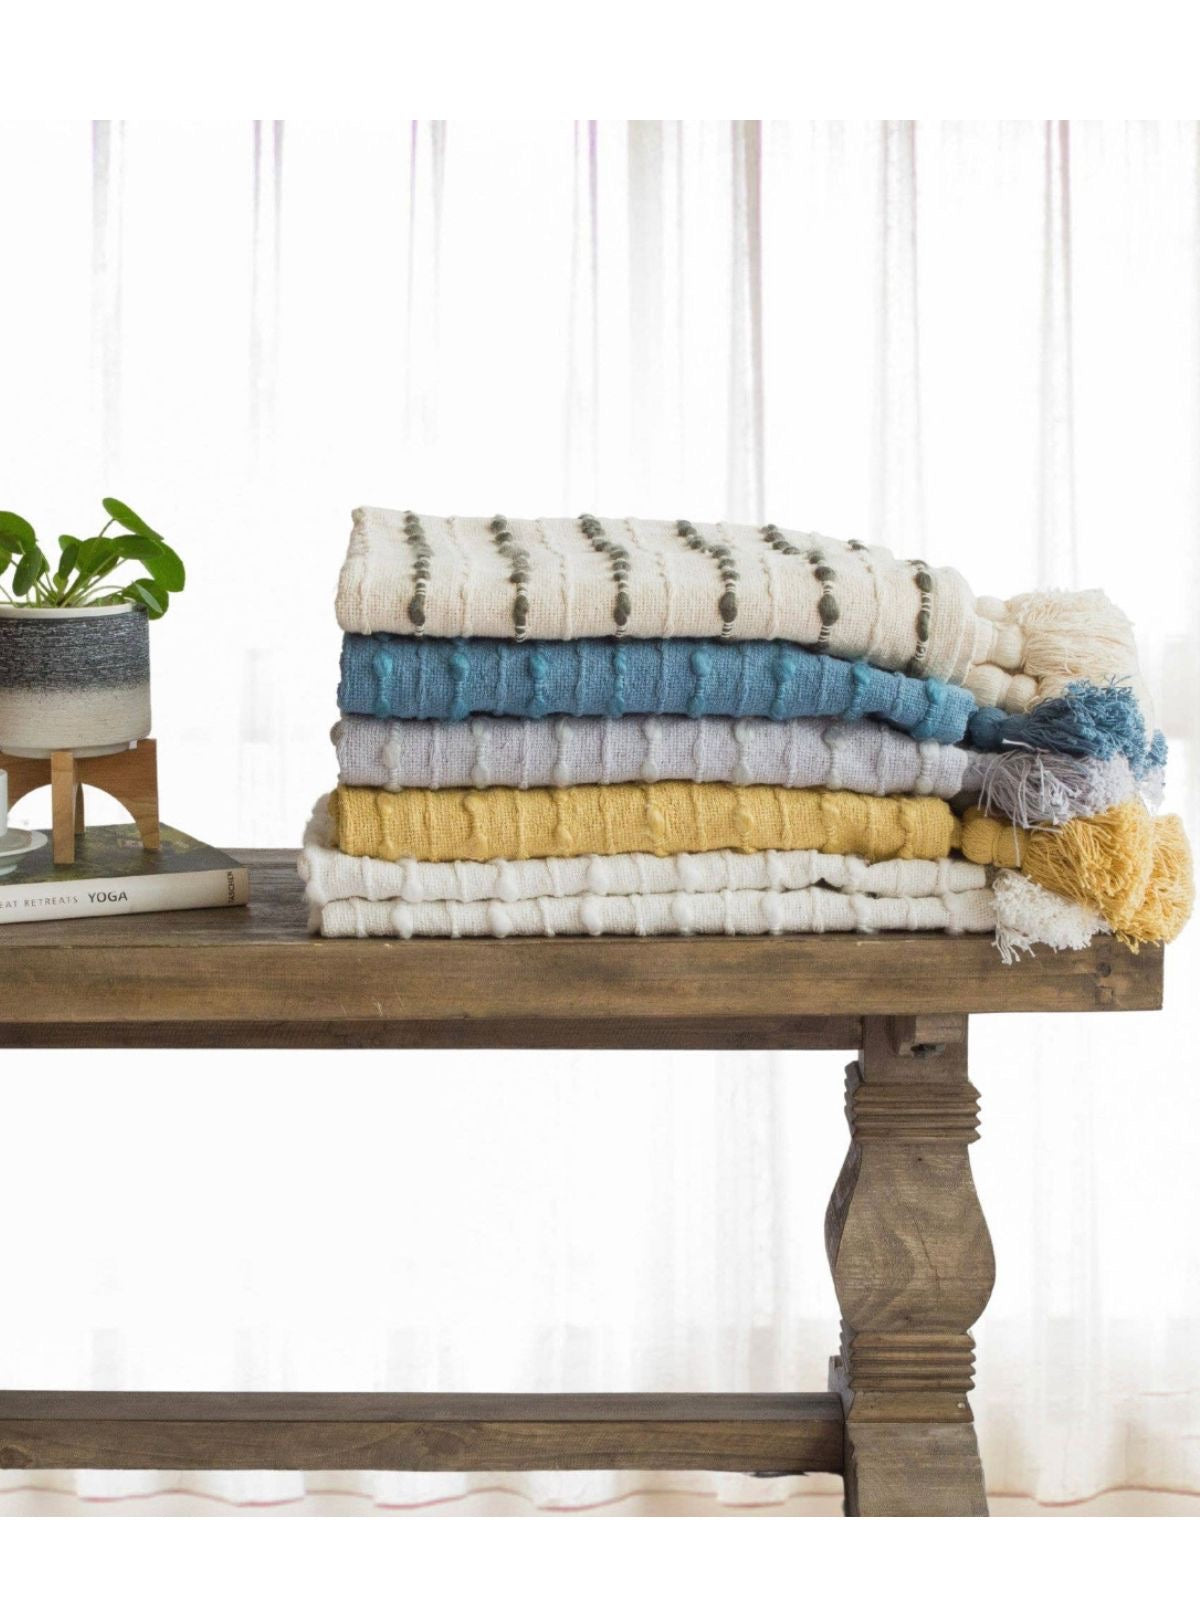 This handmade decorative throw blanket is made from linen-look weaved fabric sold by KYA Home Decor, 50W x 60L.